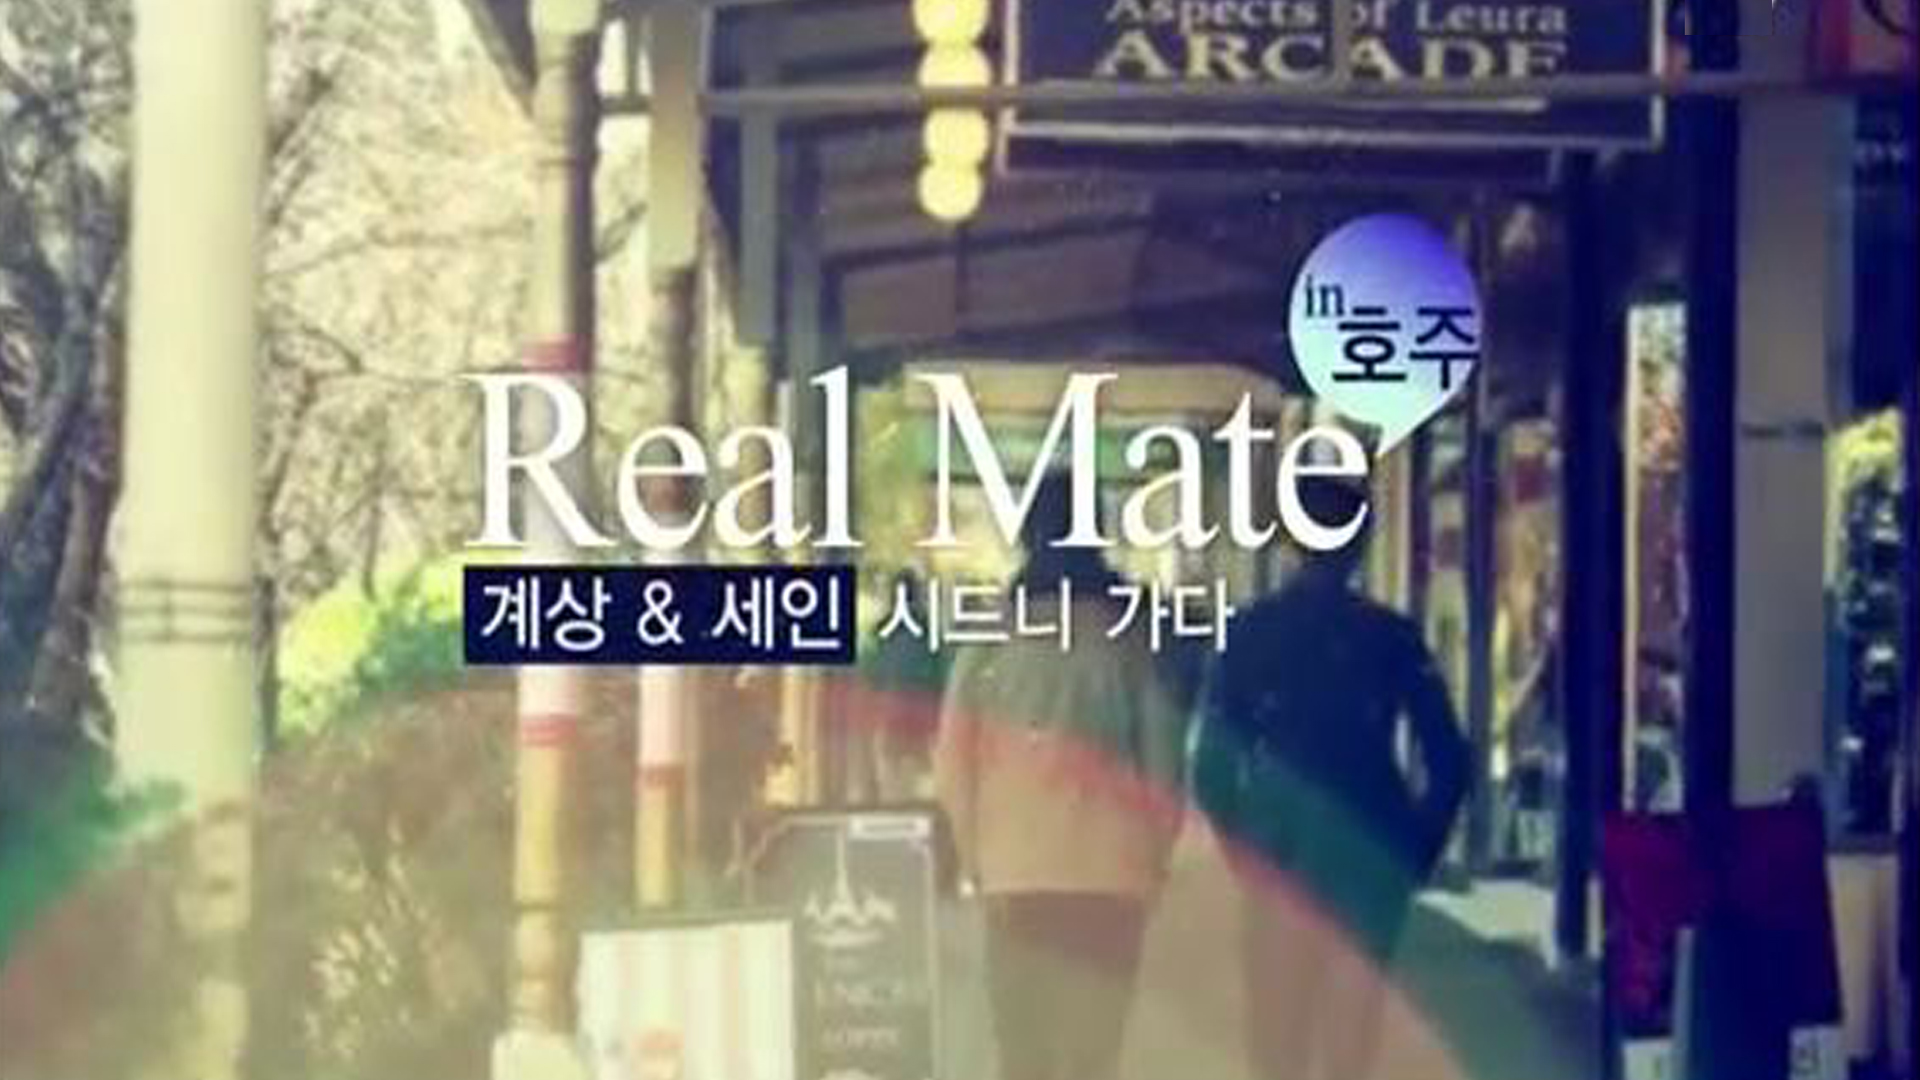 Real Mate in 호주4